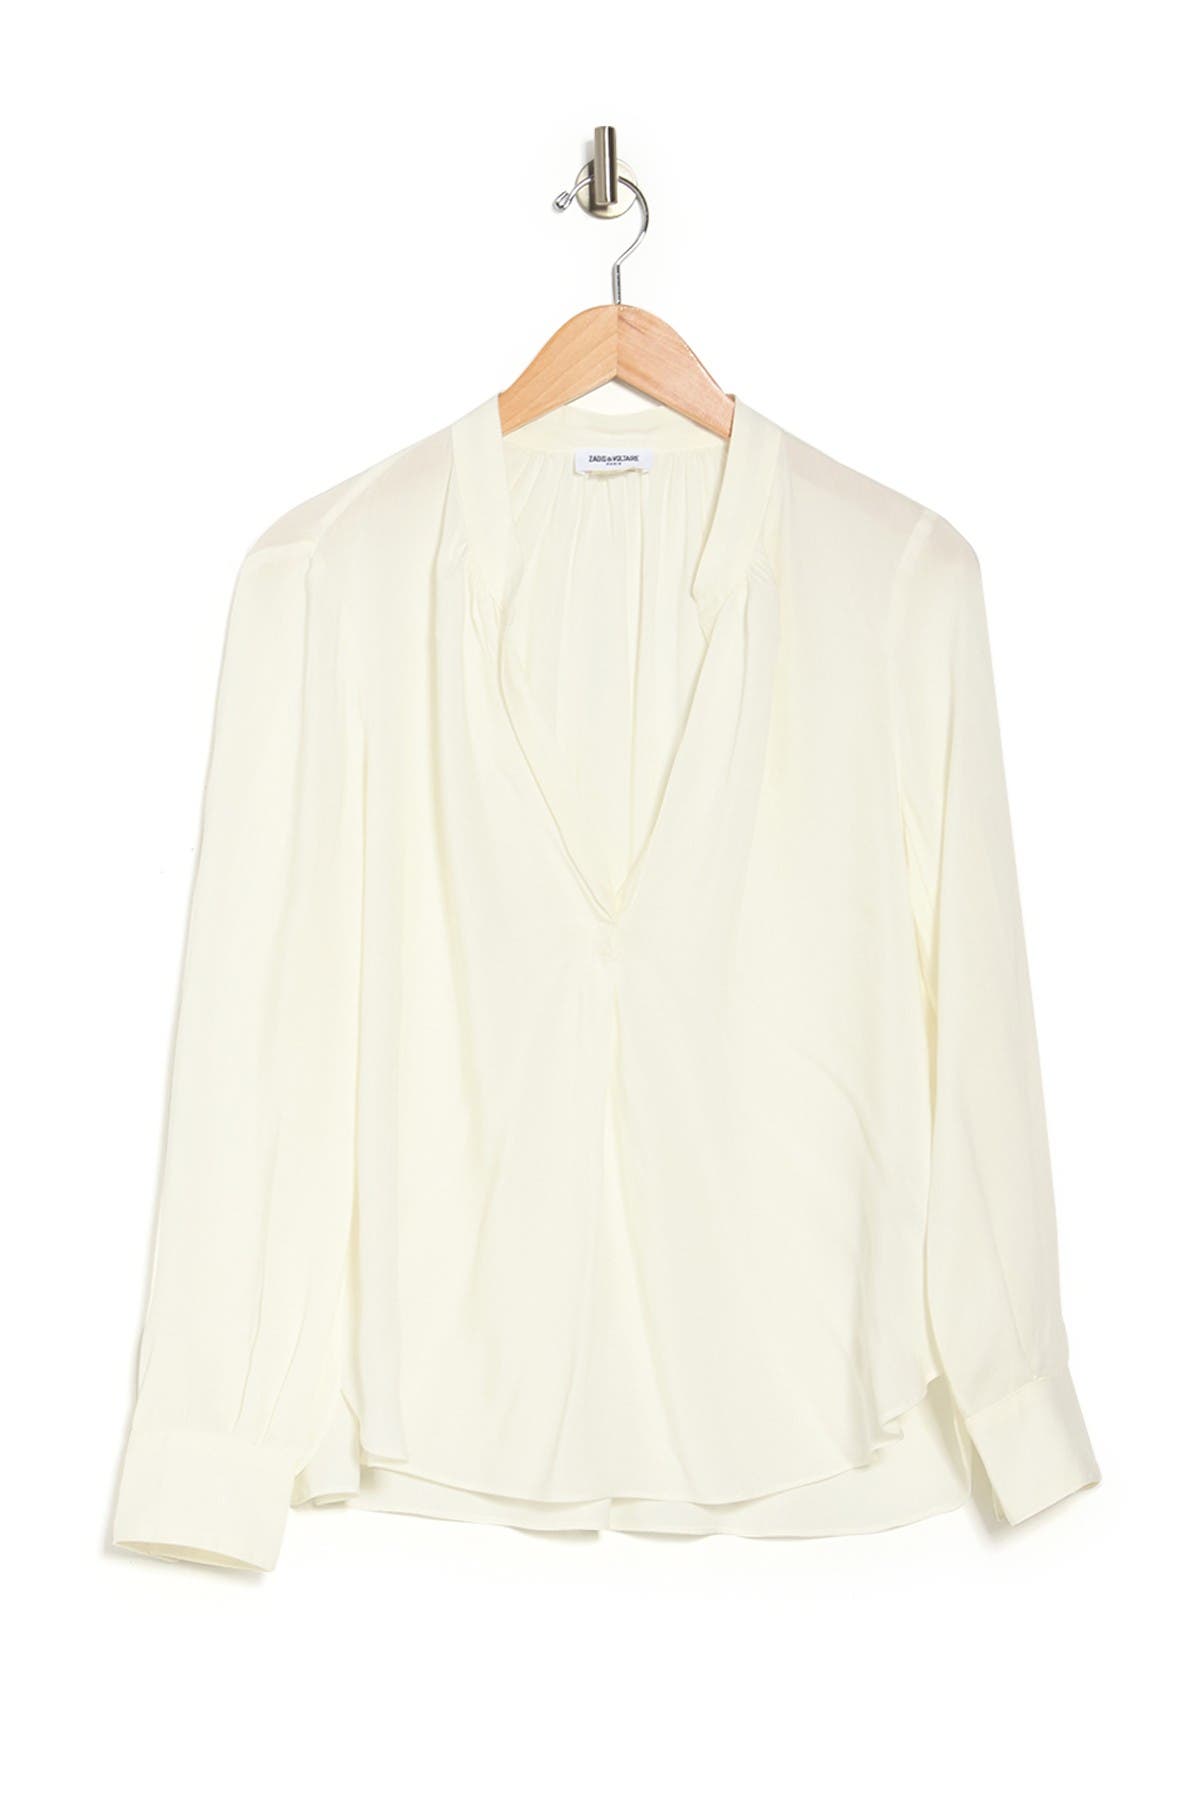 Zadig & Voltaire Tink V-neck Blouse In Open White2